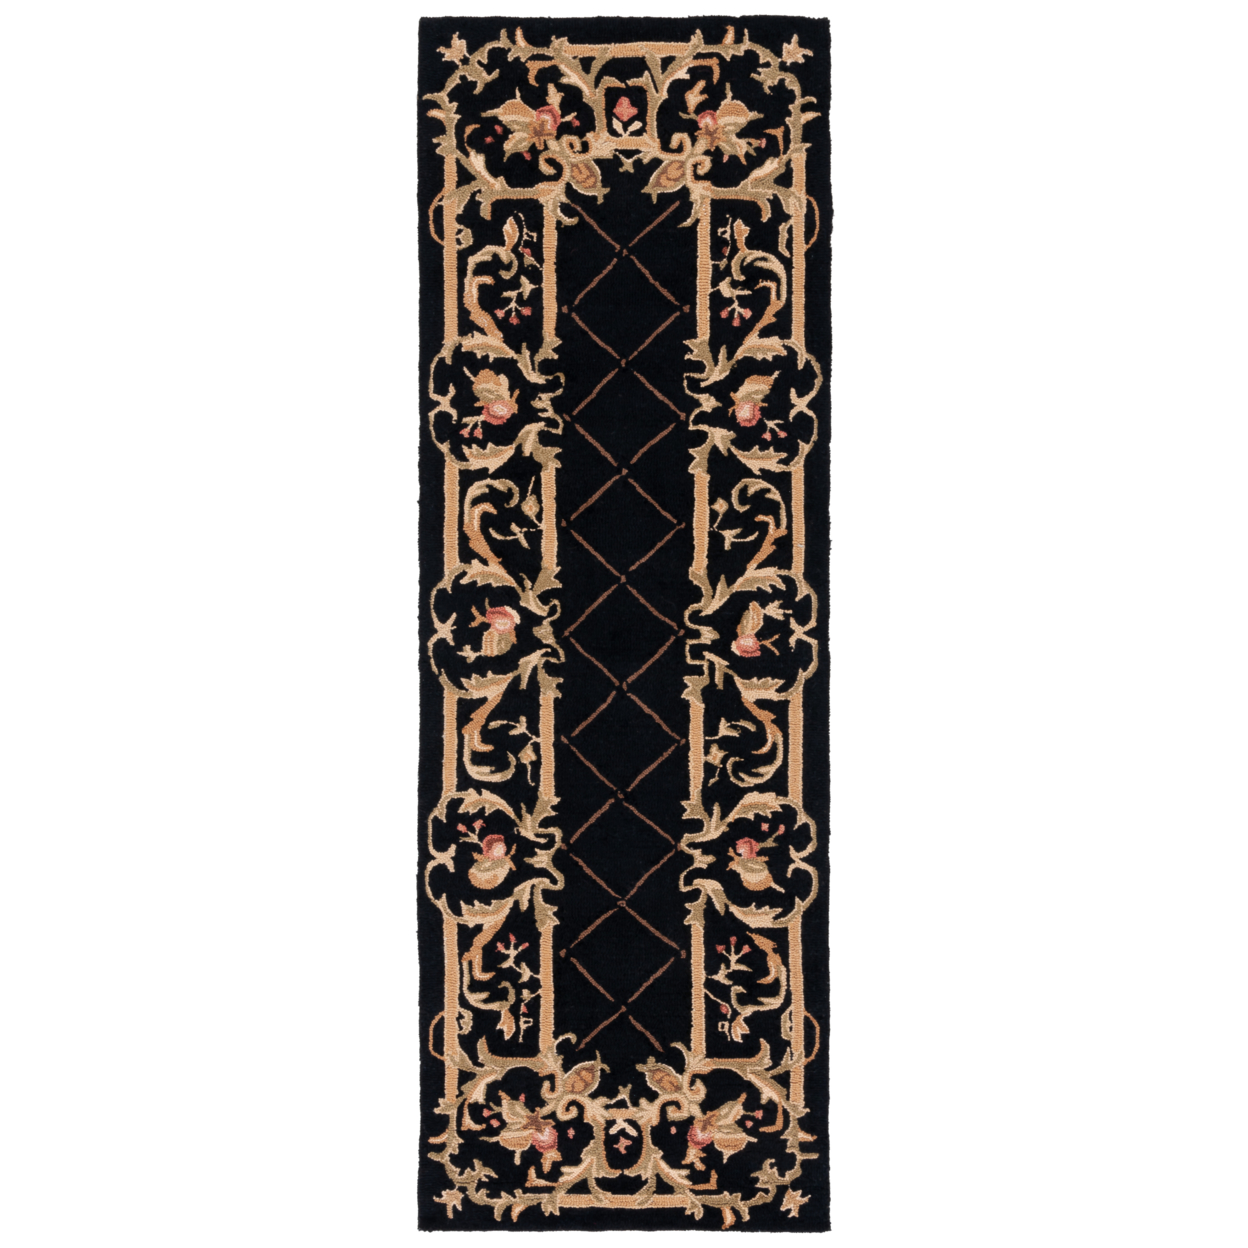 SAFAVIEH Chelsea Collection HK333B Hand-hooked Black Rug - 3' X 6'